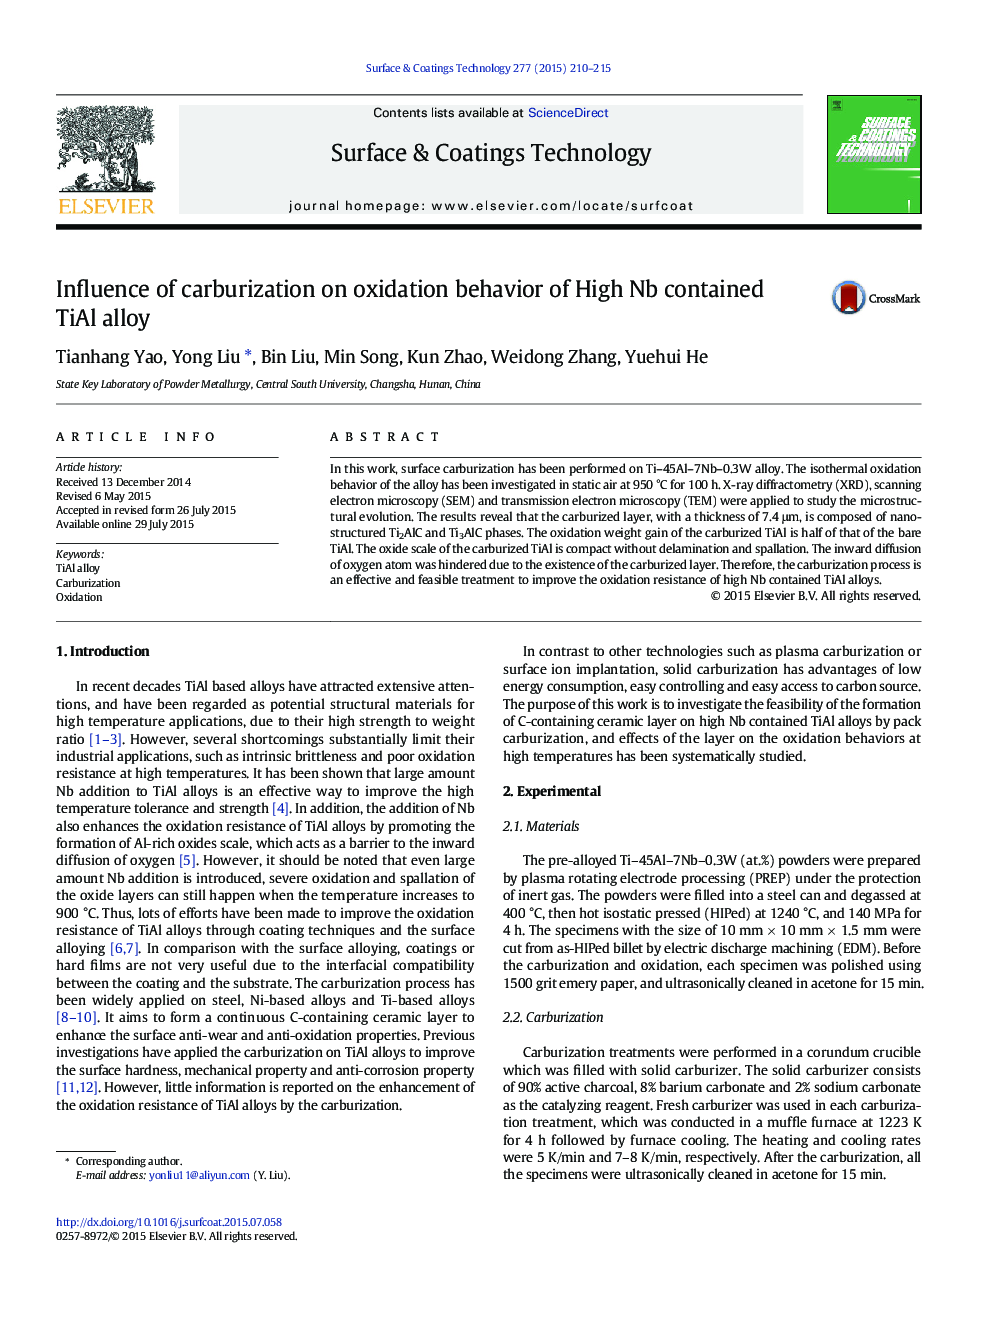 Influence of carburization on oxidation behavior of High Nb contained TiAl alloy